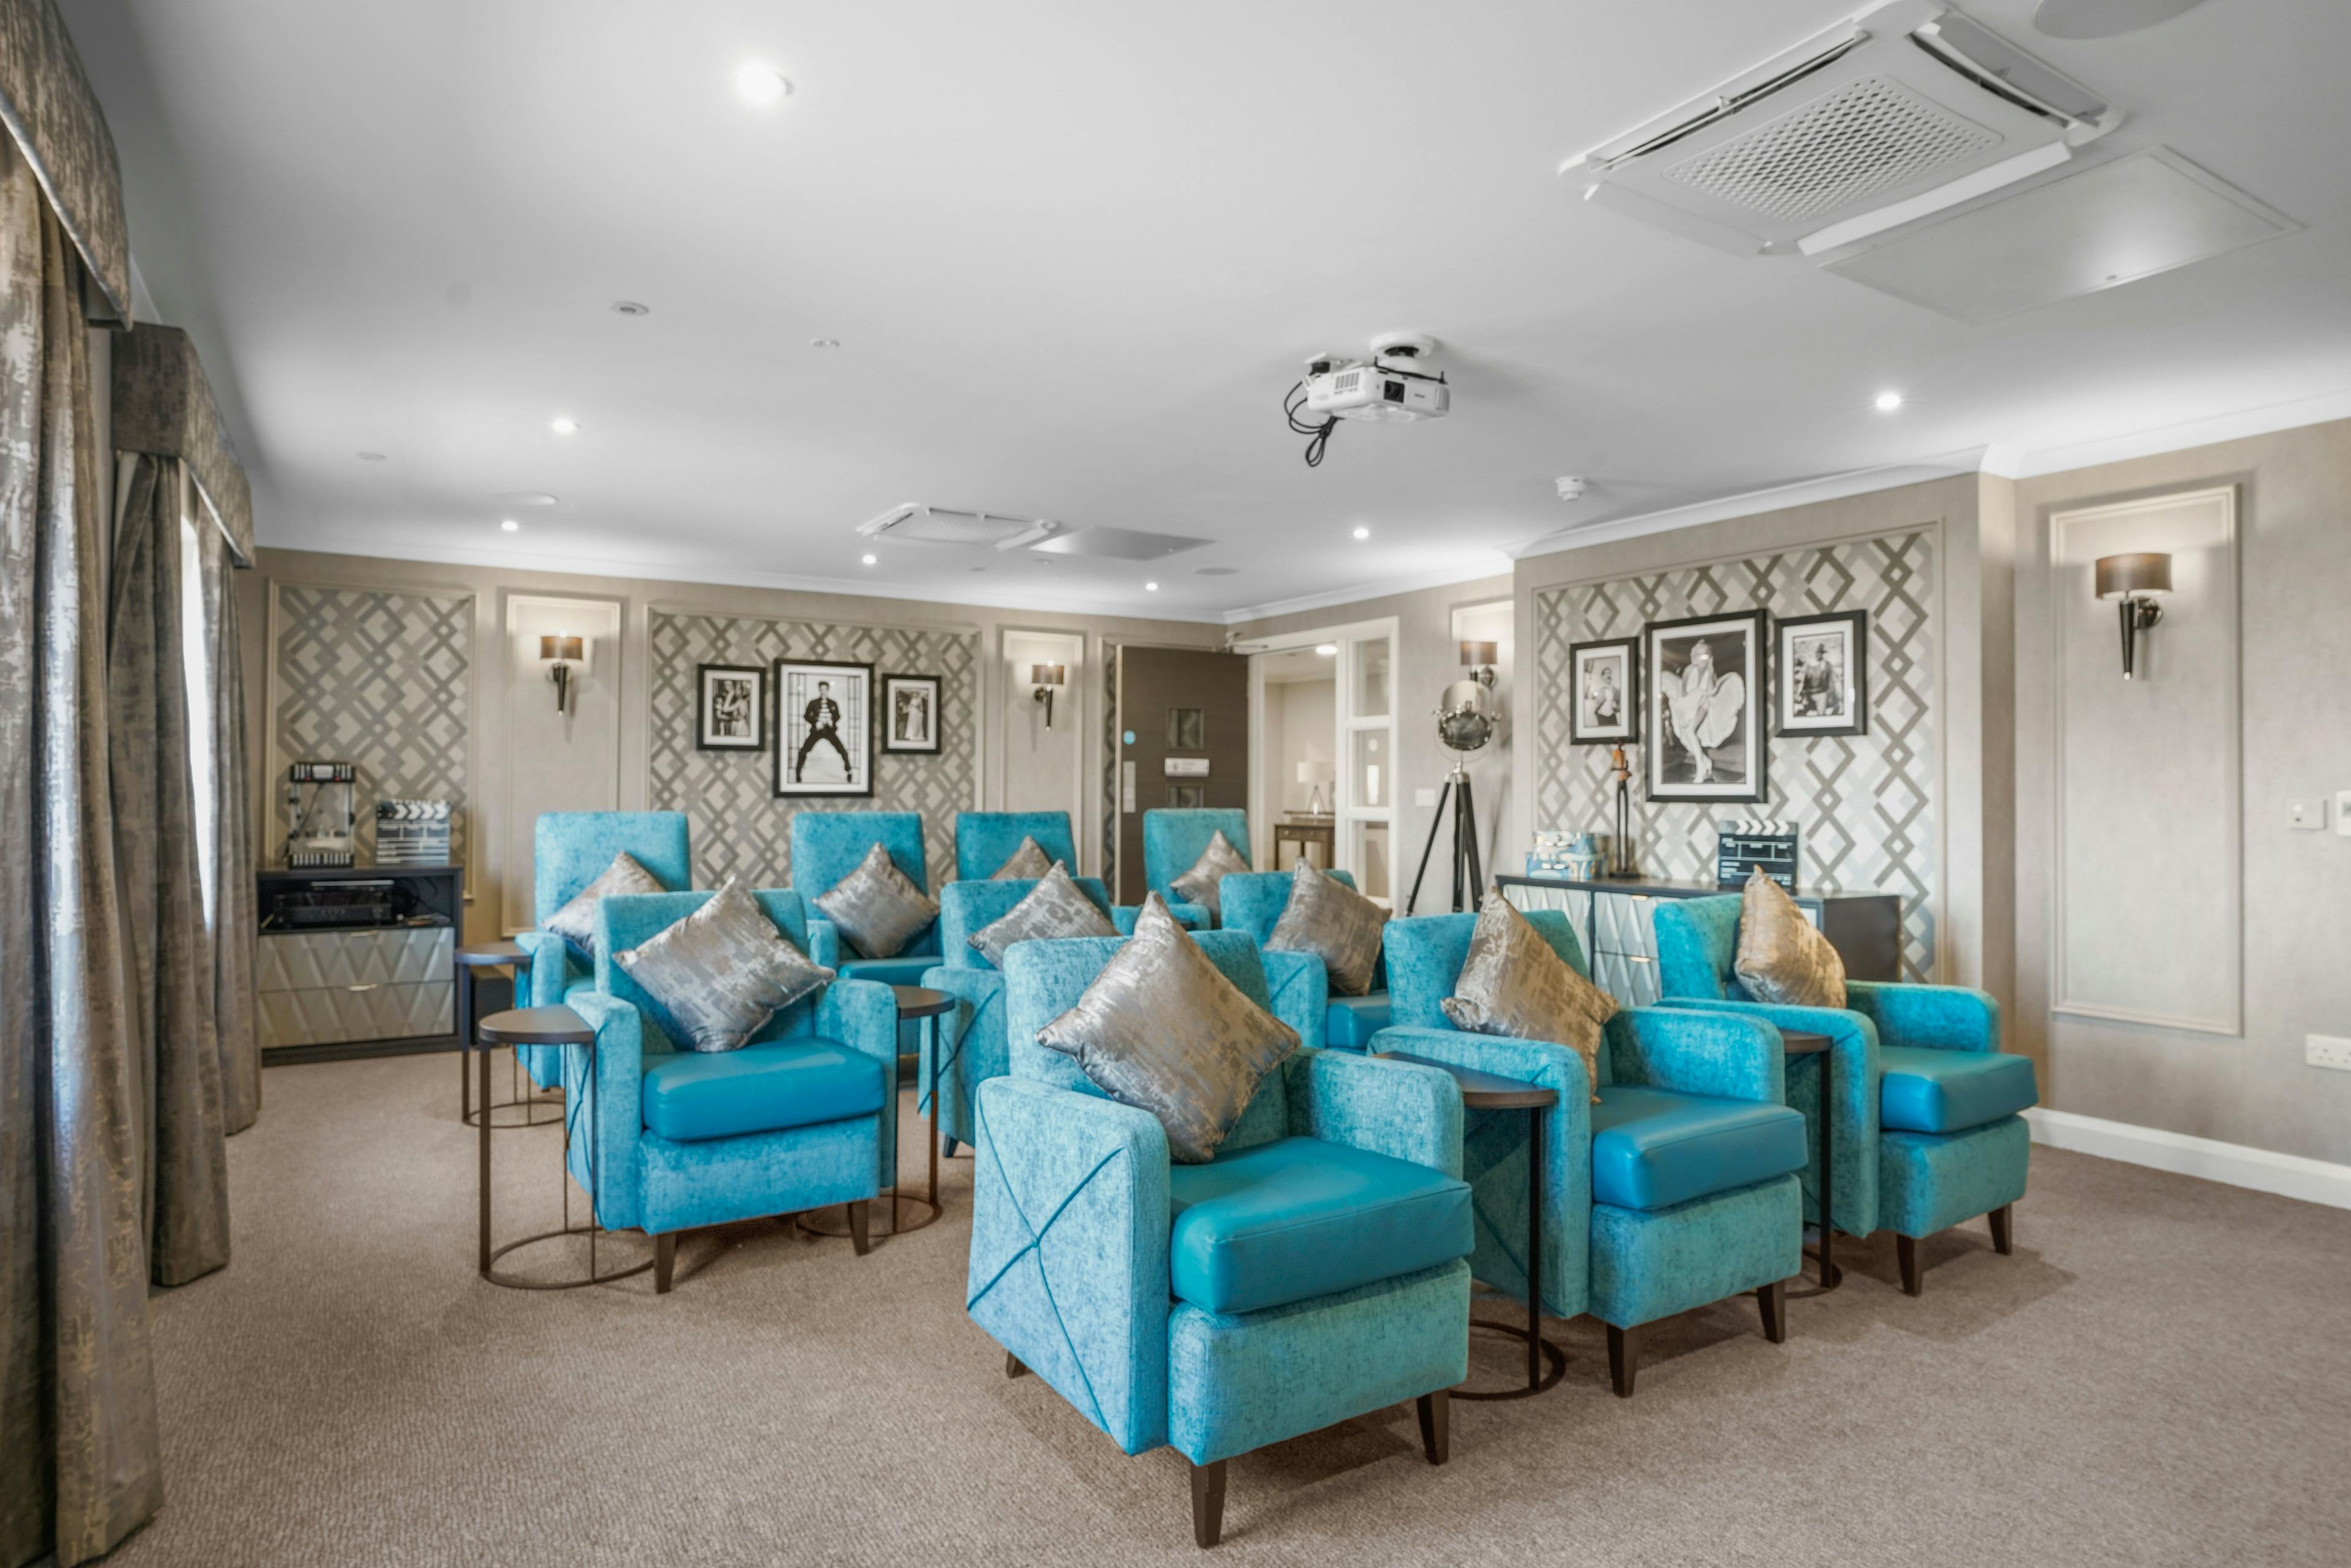 Cinema of Toray Pines care home in Woodhall Spa, Lincolnshire